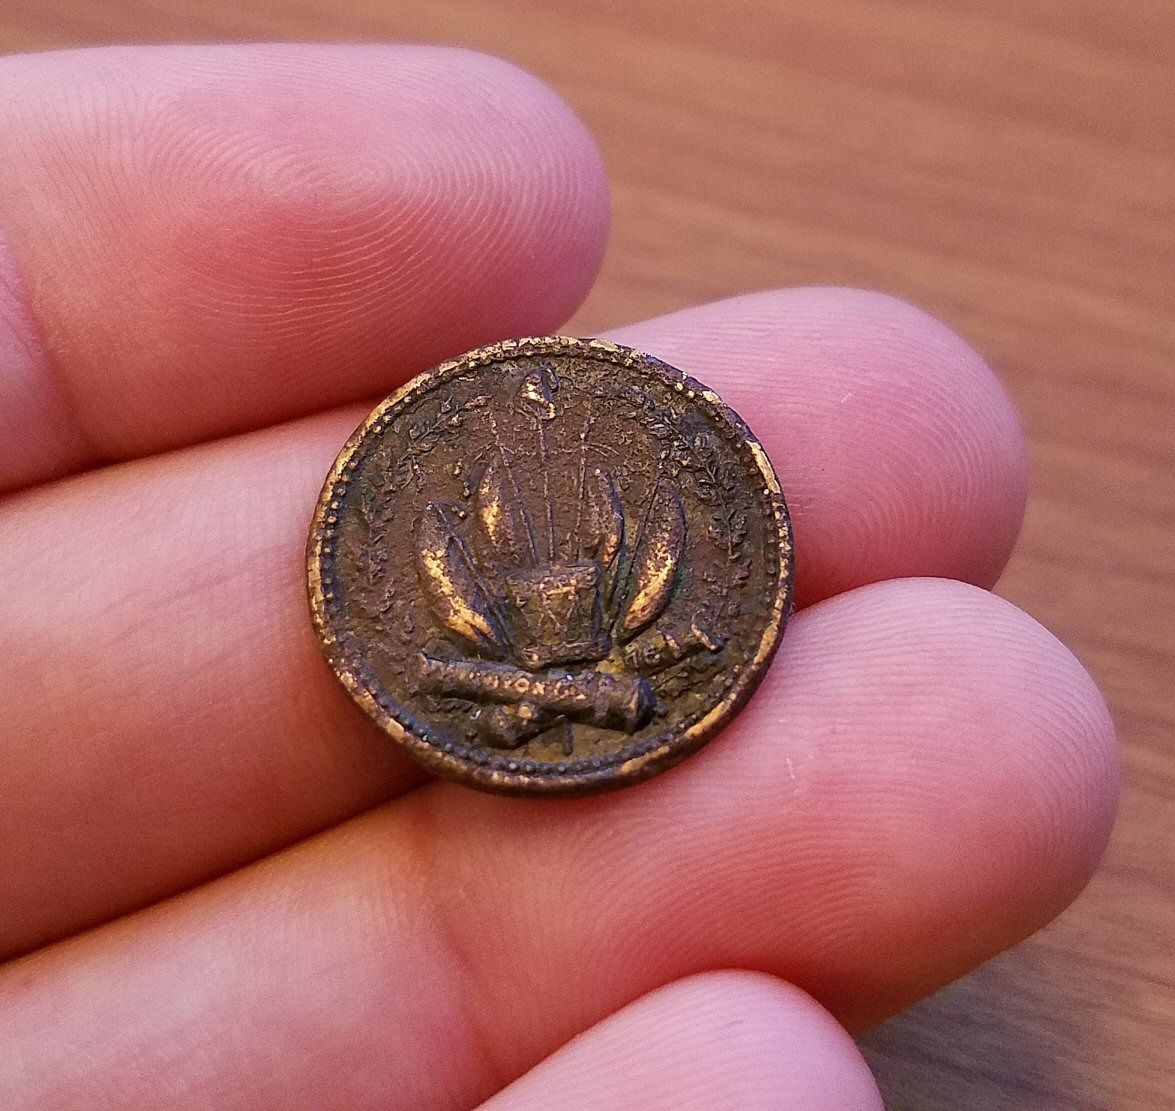 This is an 1863 war token from the Civil War. It was made by a supporter of the Union and was intended to circulate as emergency money and was interch